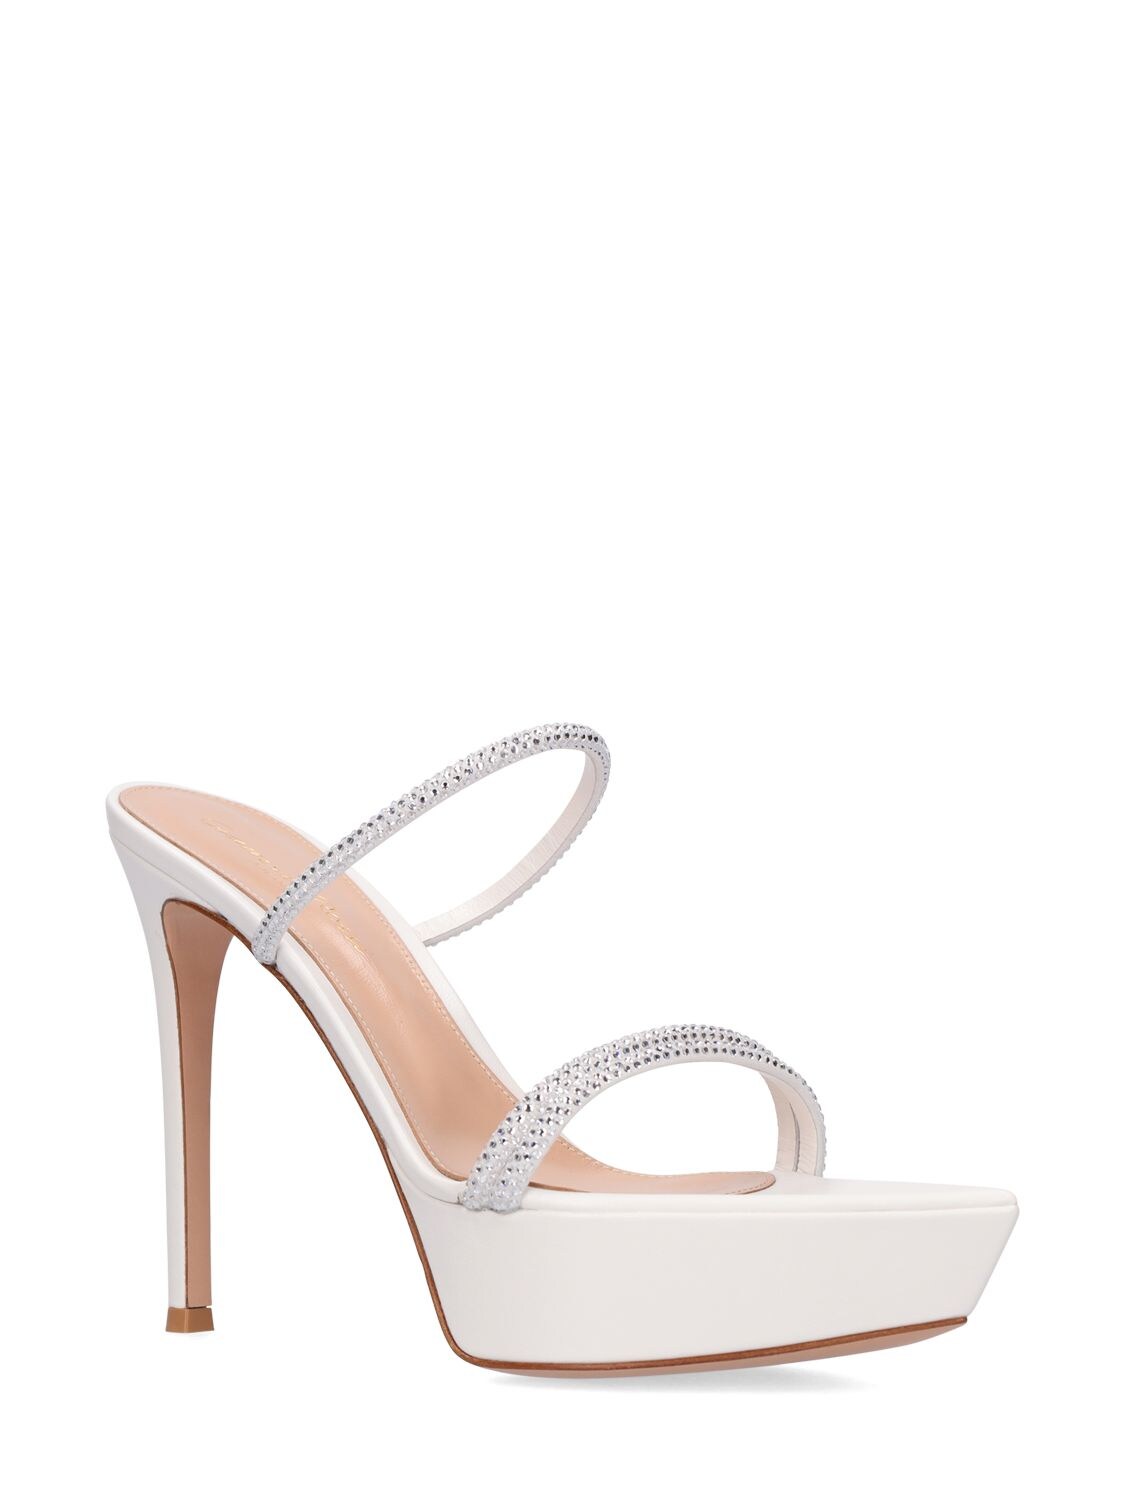 Shop Gianvito Rossi 130mm Cannes Crystals Platform Sandals In White